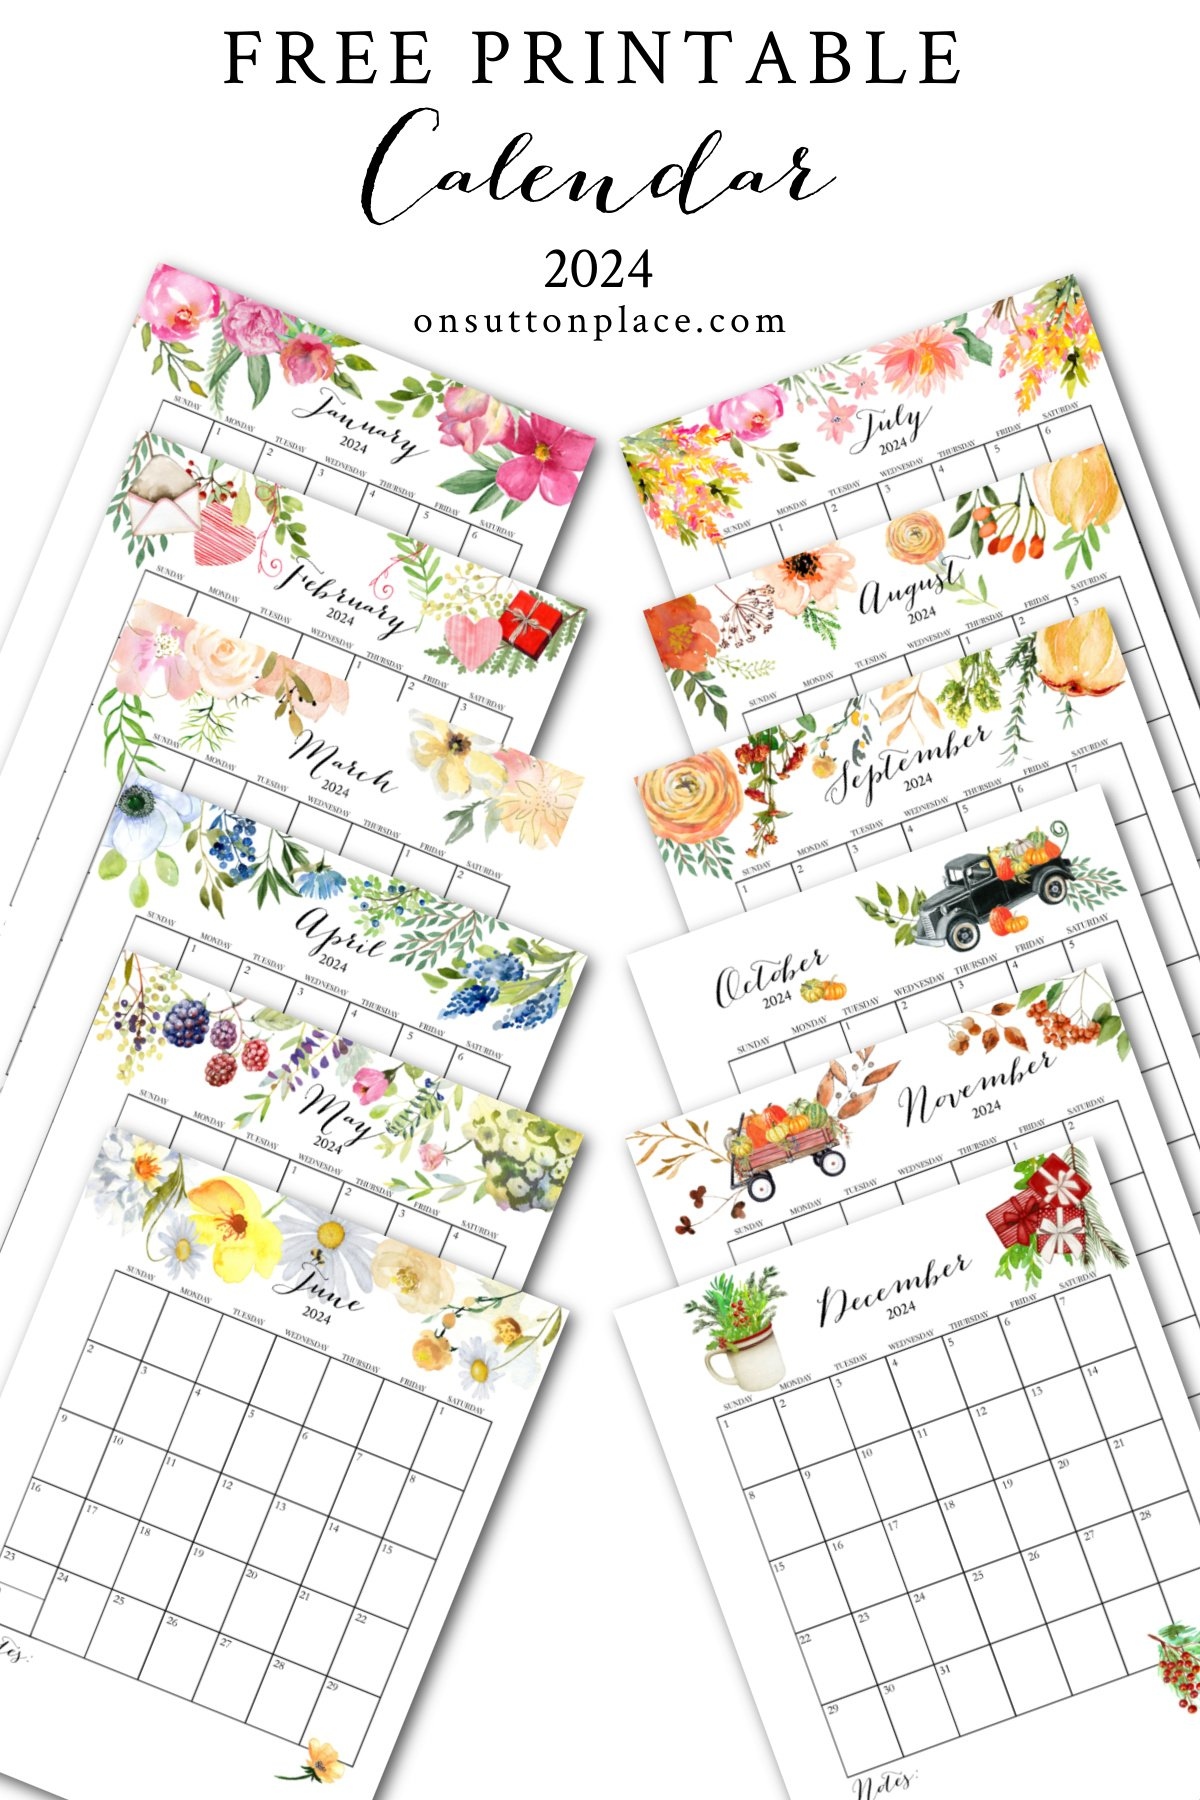 2024 Free Printable Calendar With Planner Pages - On Sutton Place pertaining to Free Printable Calendar 2024-2025 Cute Vertical